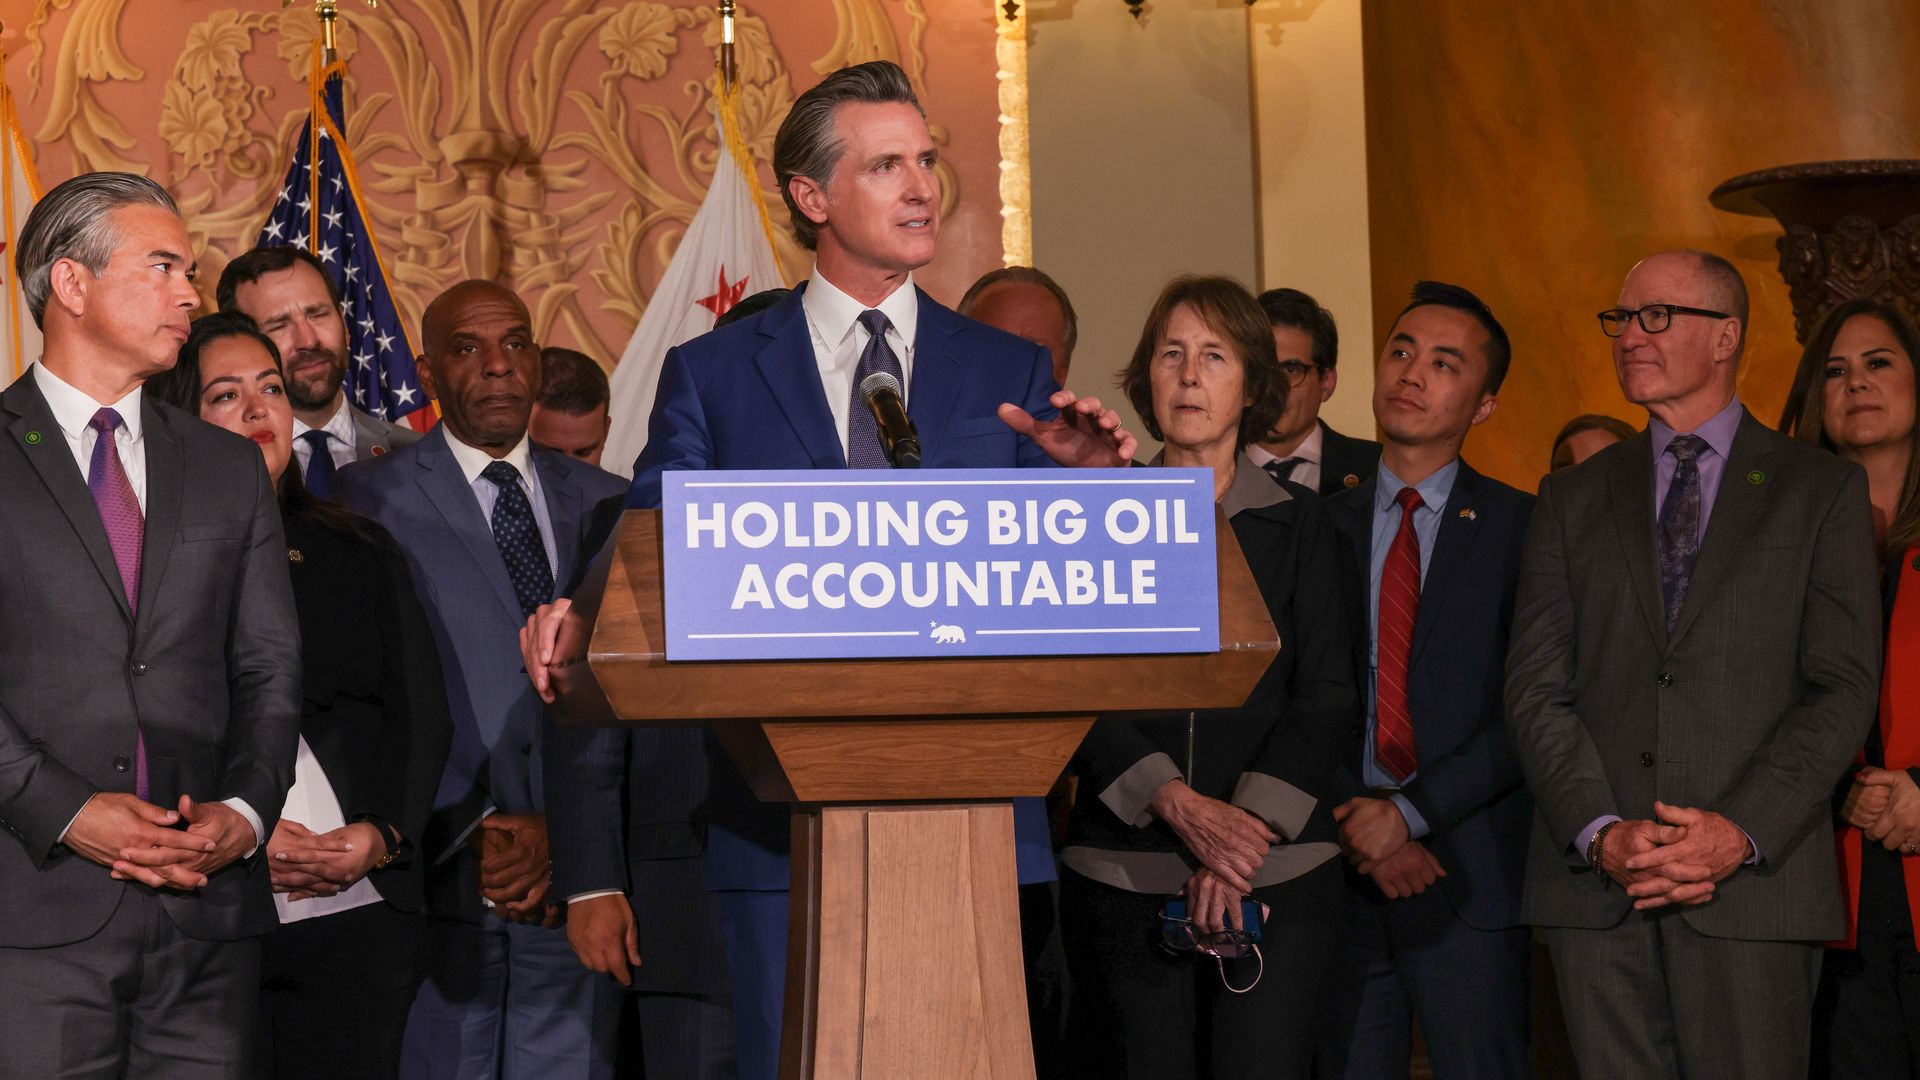 California Gov. Gavin Newsom after signing legislation to implement the strongest state-level oversight and accountability measures on Big Oil in the nation.